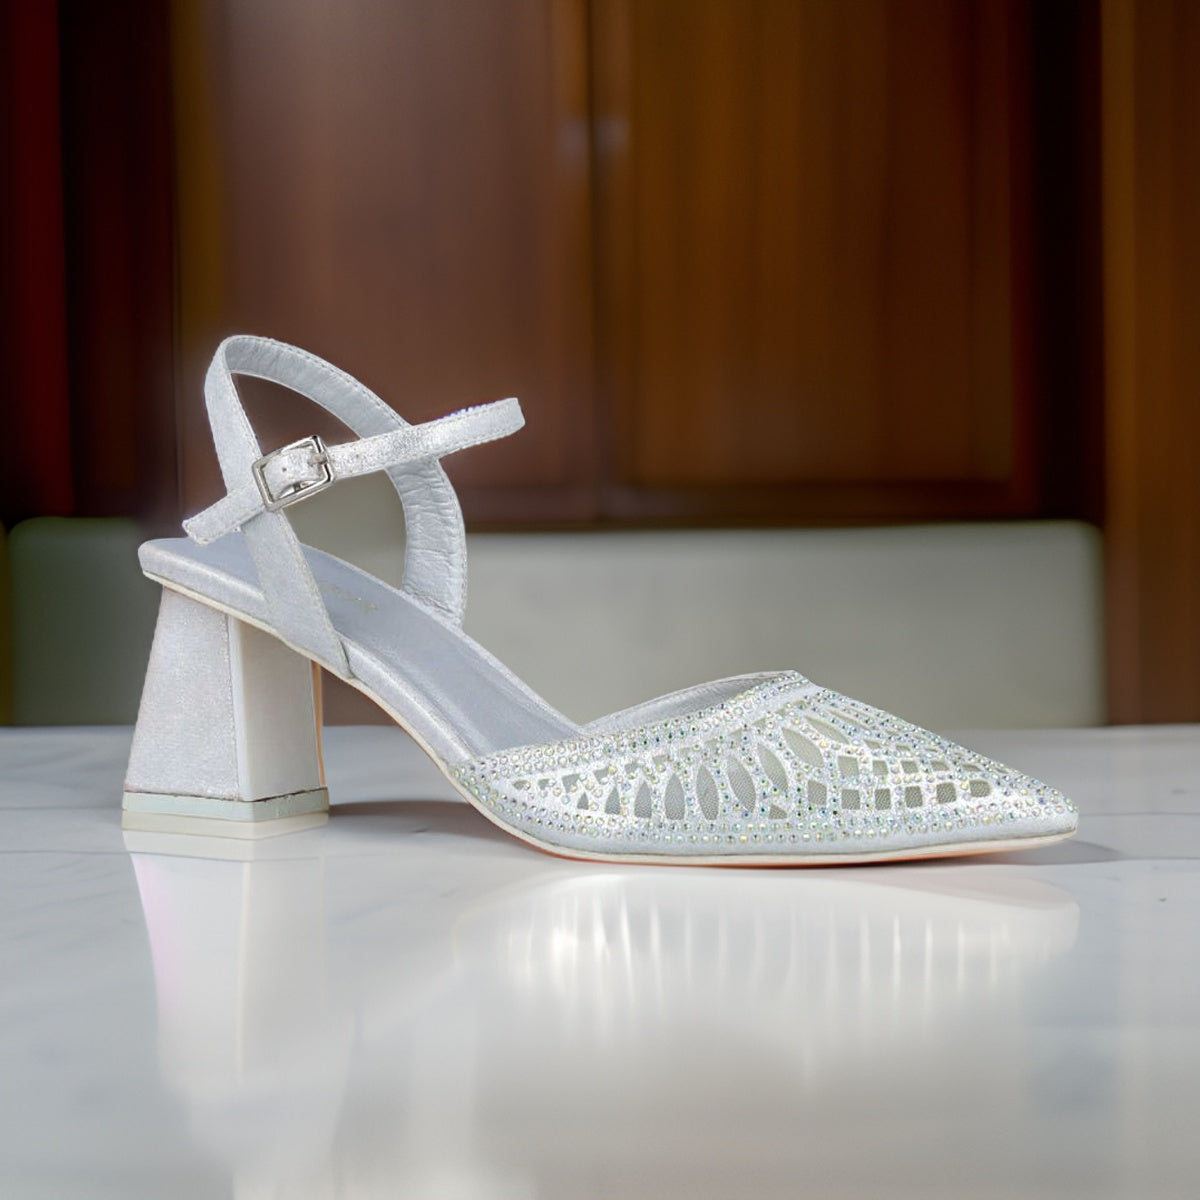 Menbur Silver Sandal with Sculpted Heel and Diamante Toe